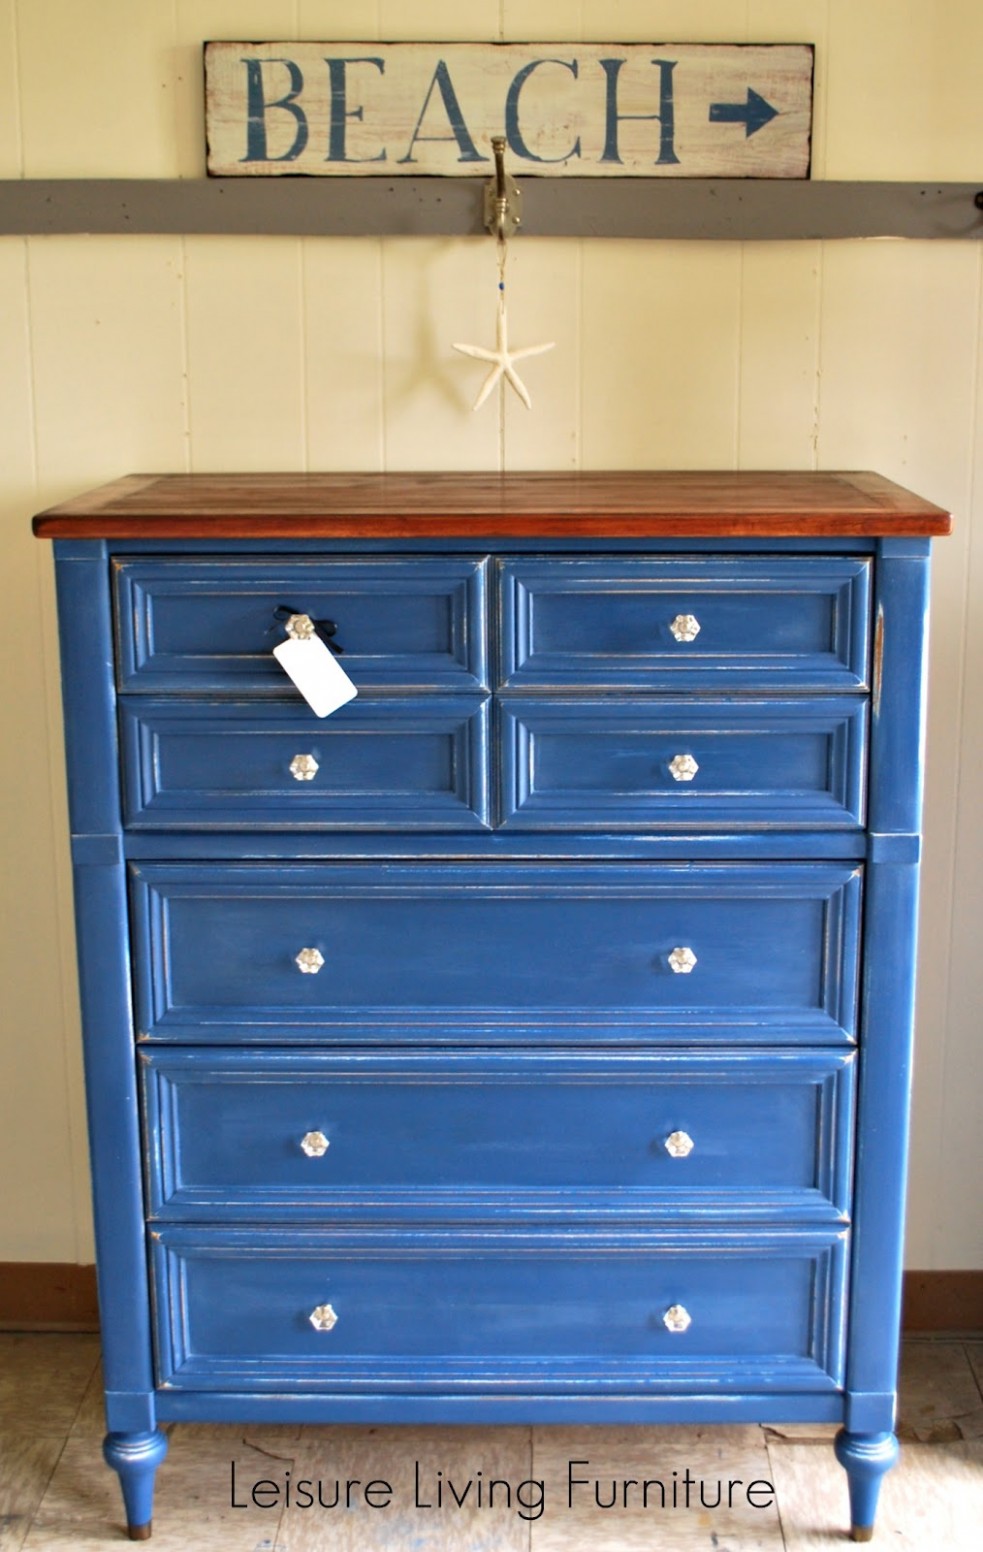 Annie Sloan Chalk Paint | Refreshed Finds Junkies Annie Sloan Chalk Paint Köpa Online